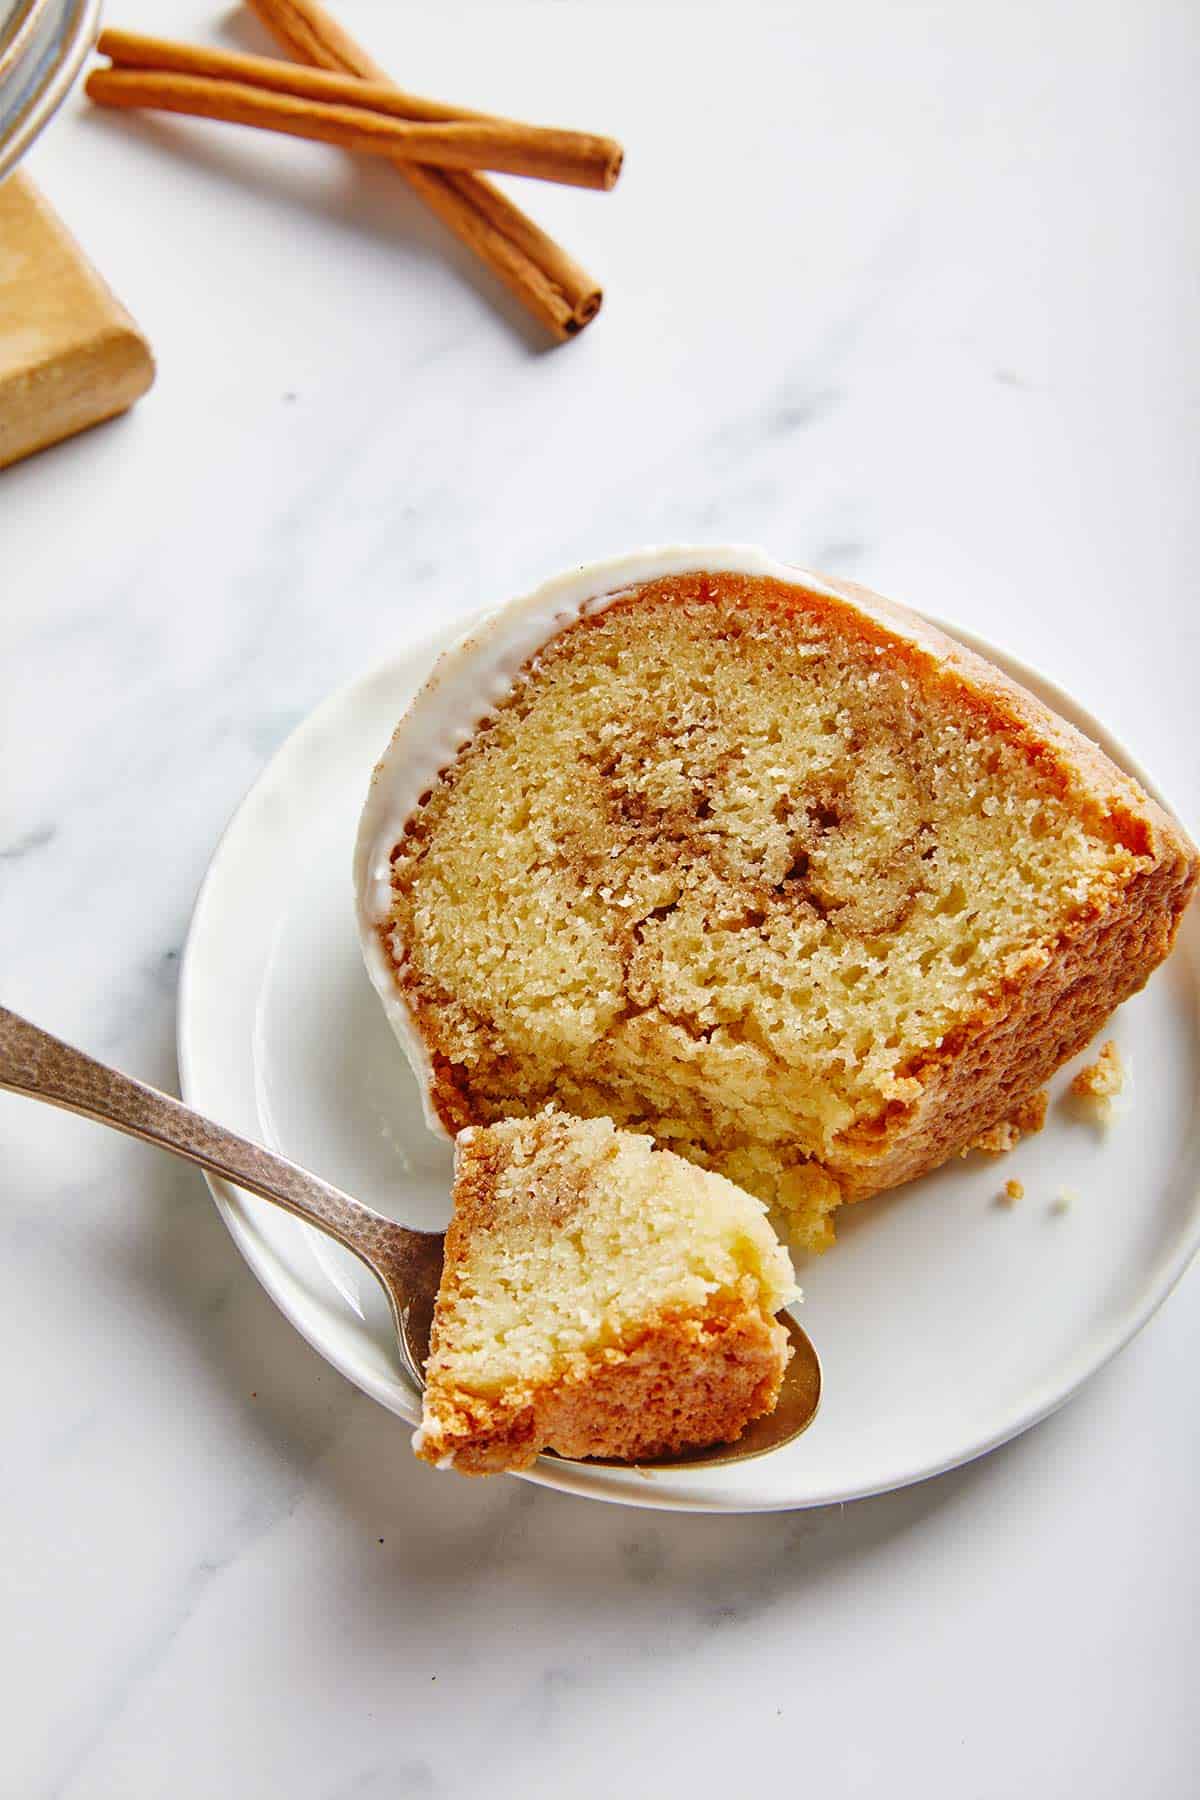 A piece of cinnamon pound cake on a plate with a bite on a spoon.